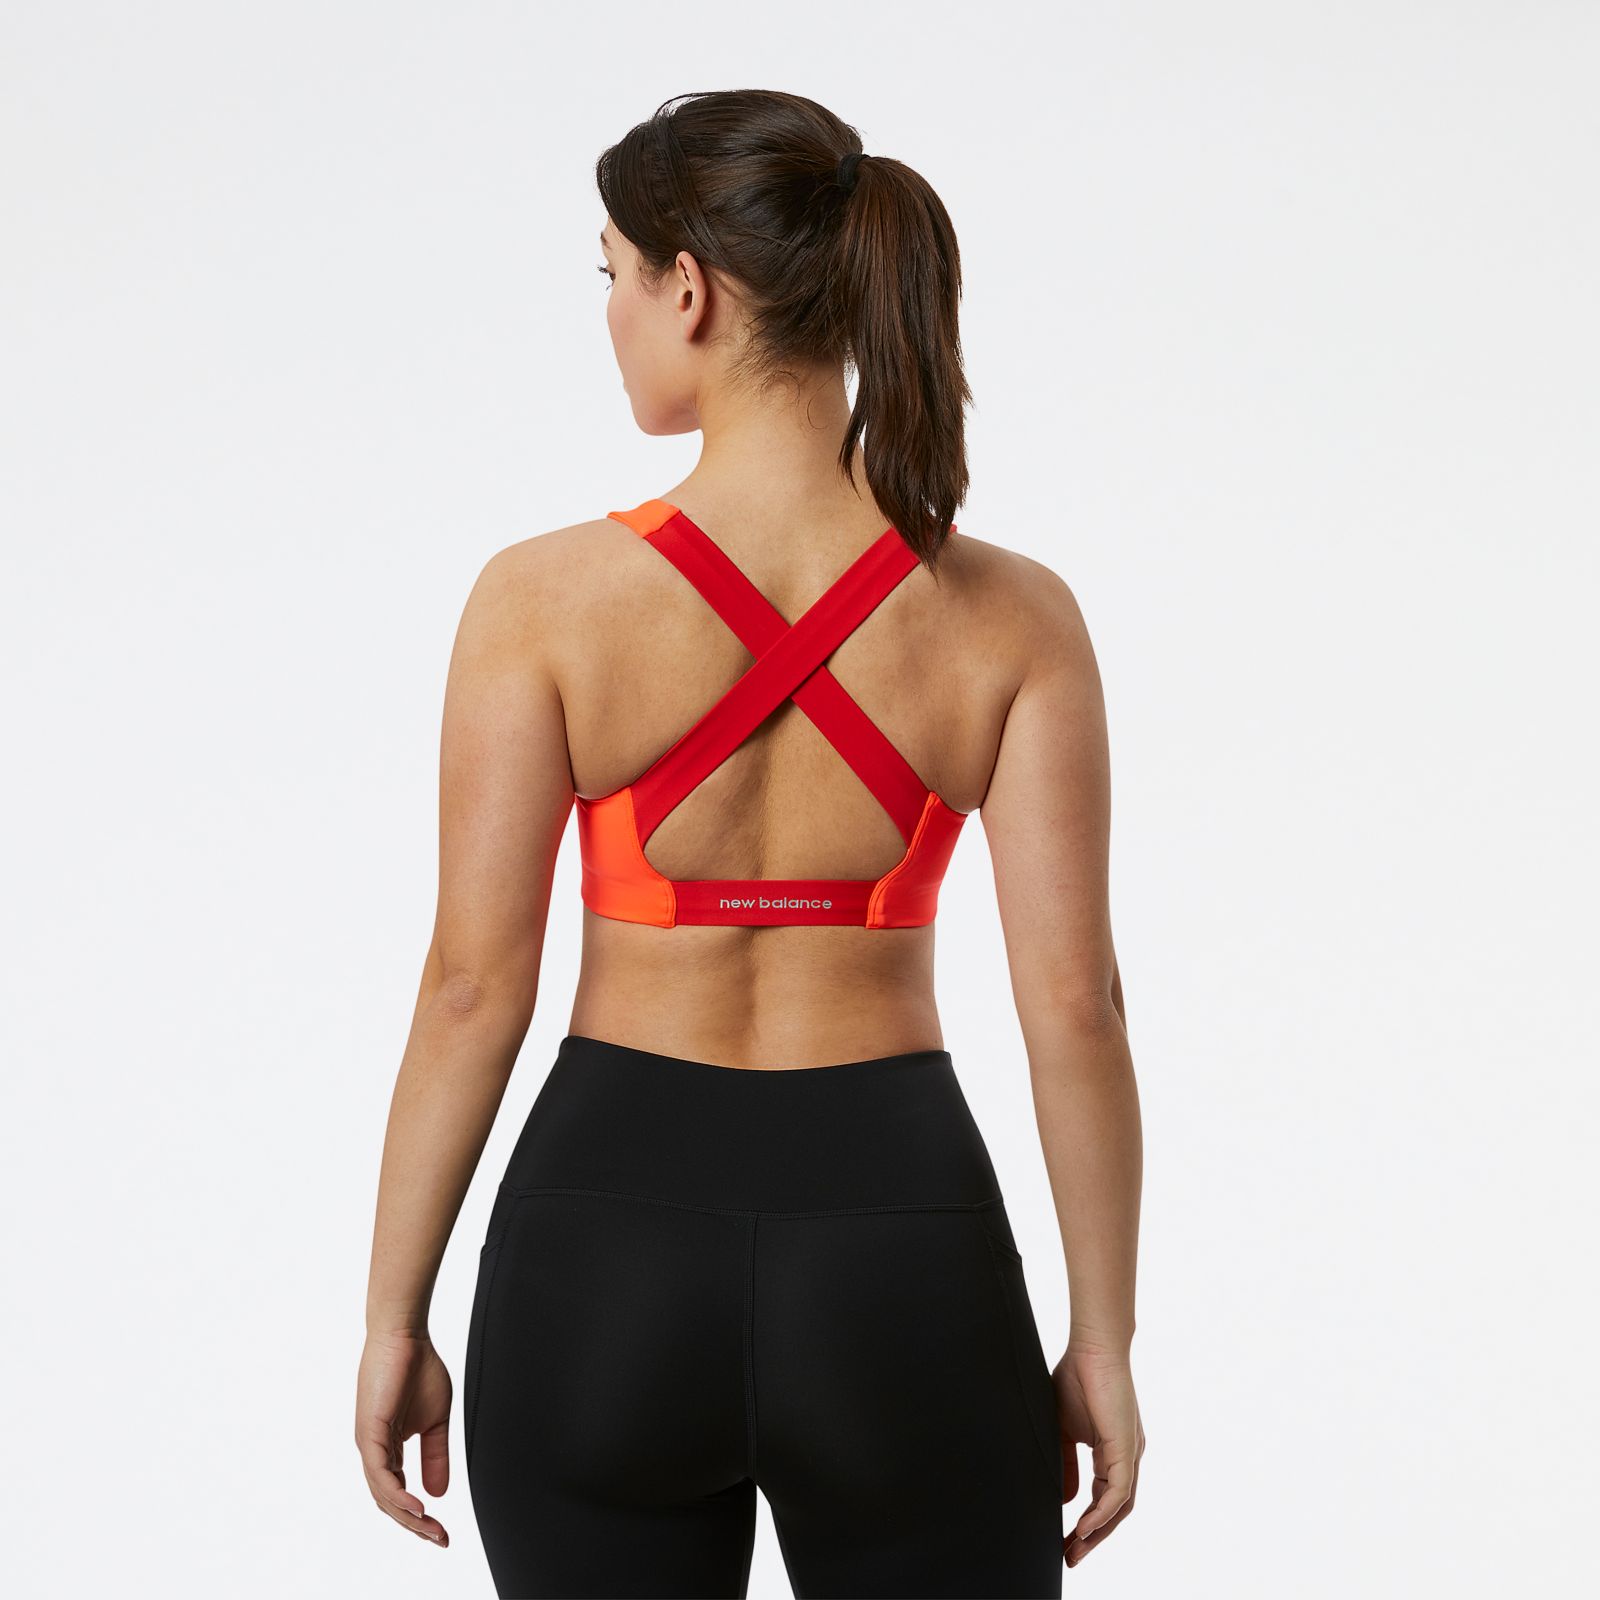 New Balance Nb fuel bra in red